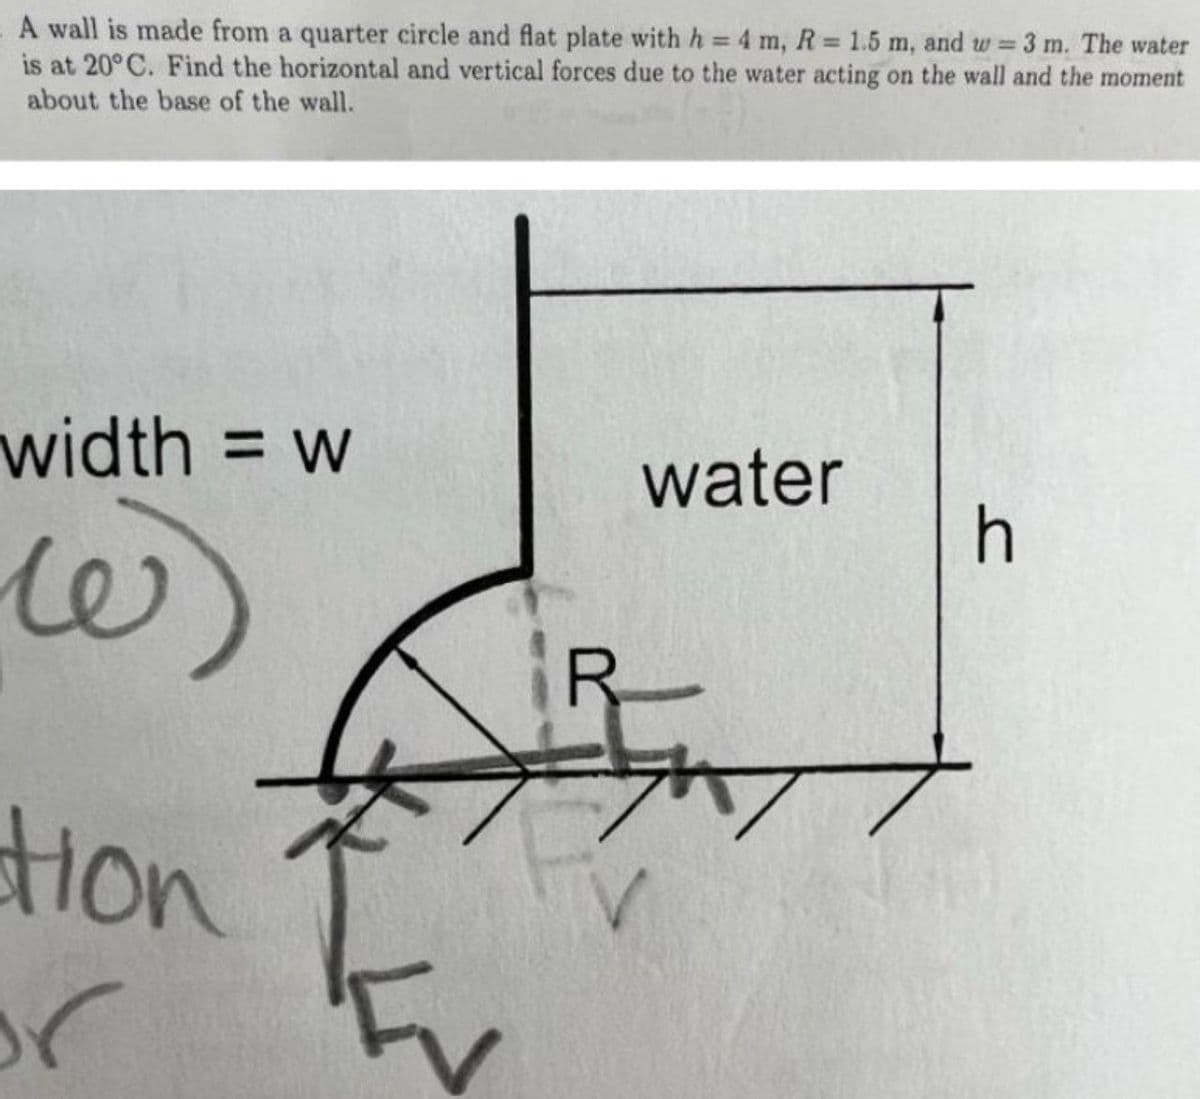 A wall is made from a quarter circle and flat plate with h = 4 m, R = 1.5 m, and w = 3 m. The water
is at 20°C. Find the horizontal and vertical forces due to the water acting on the wall and the moment
about the base of the wall.
%3D
width = w
water
w)
R-
tion
